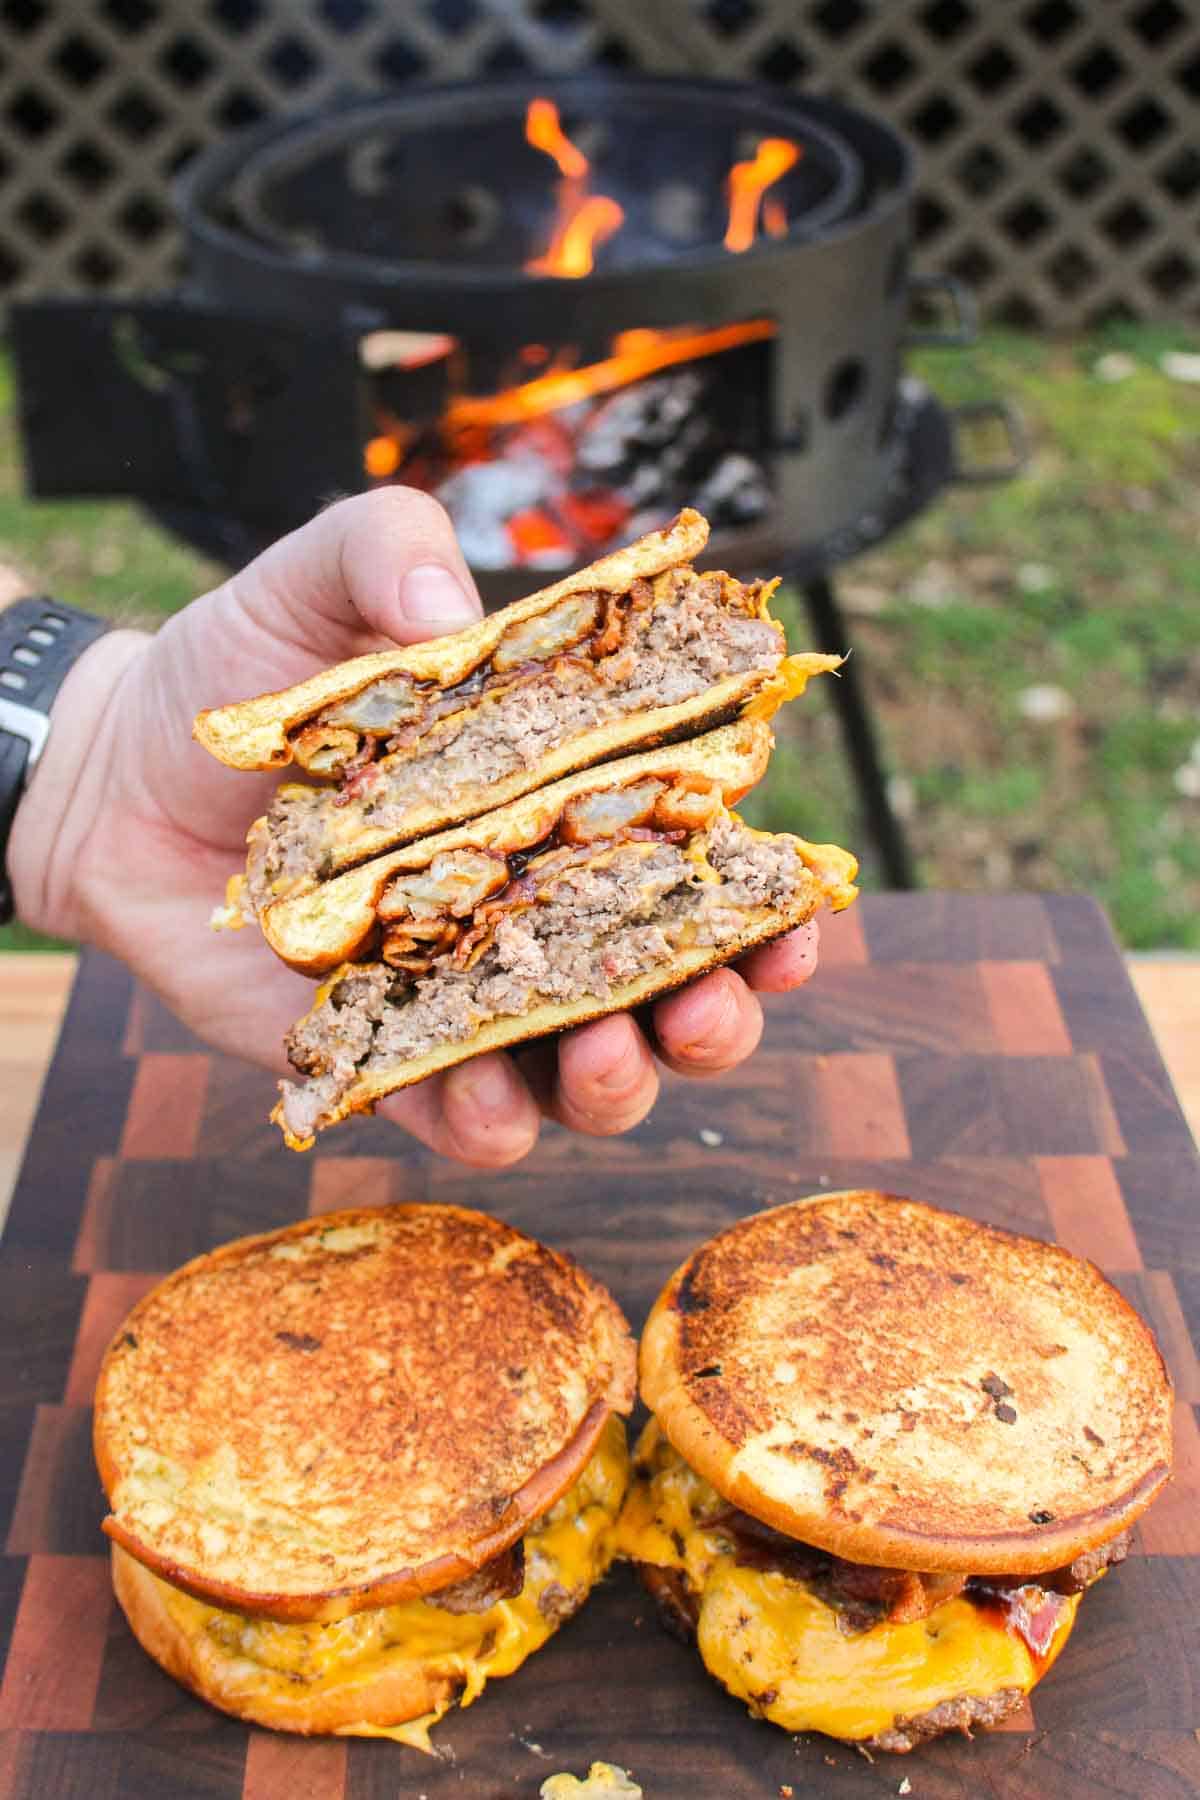 Holding a sliced Grilled Cheese BBQ Cheeseburger up to the camera.